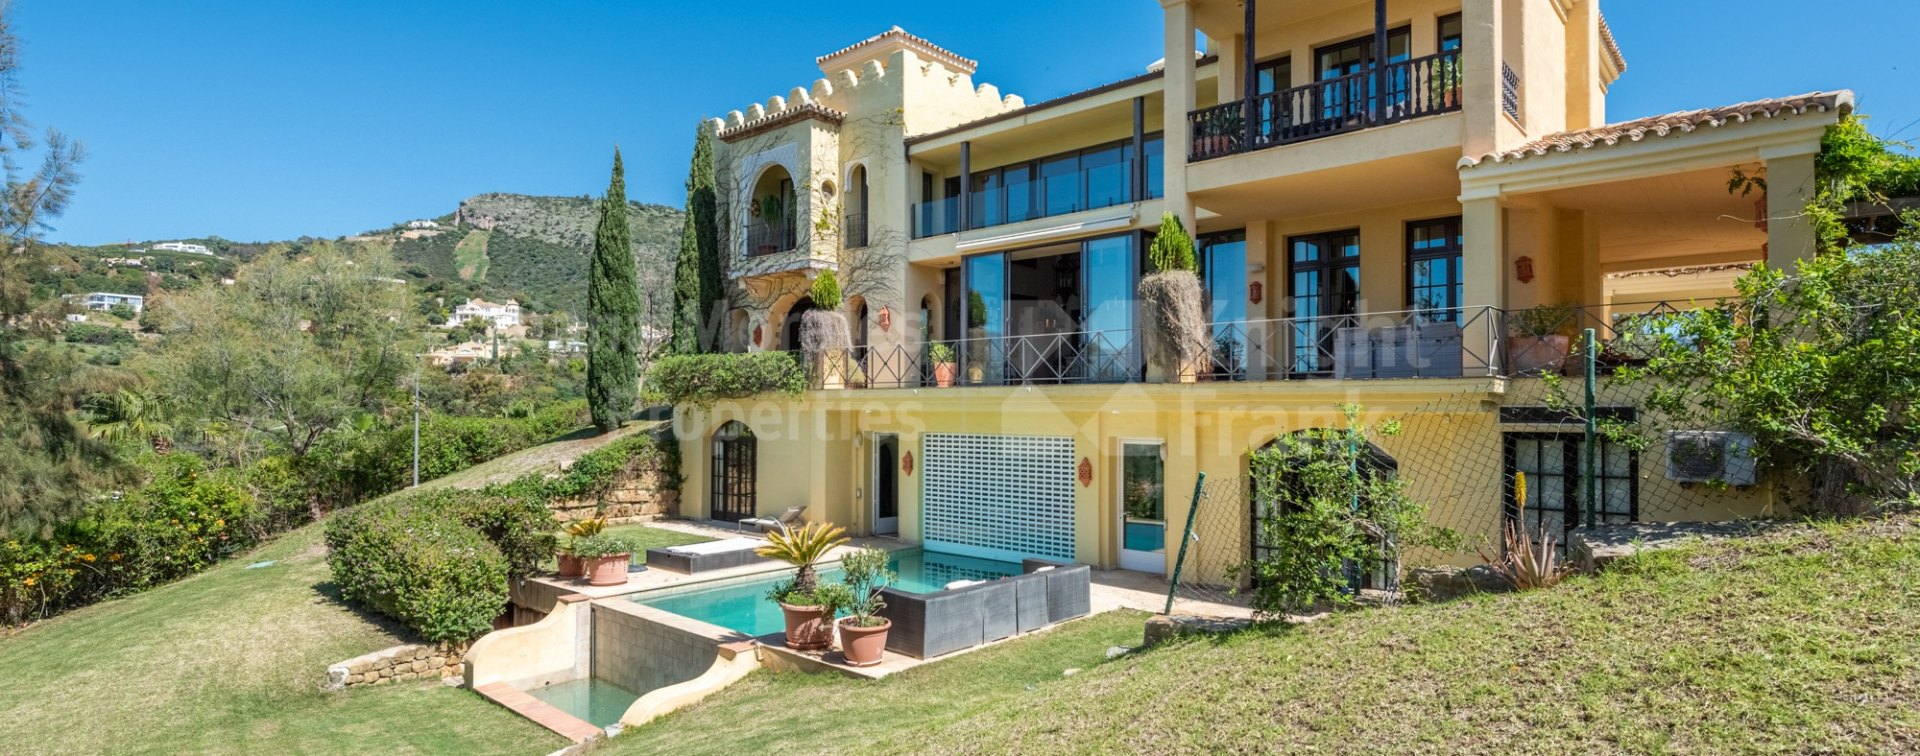 Marbella Club Golf Resort, Alhambra-style house in prestigious location with spectacular views